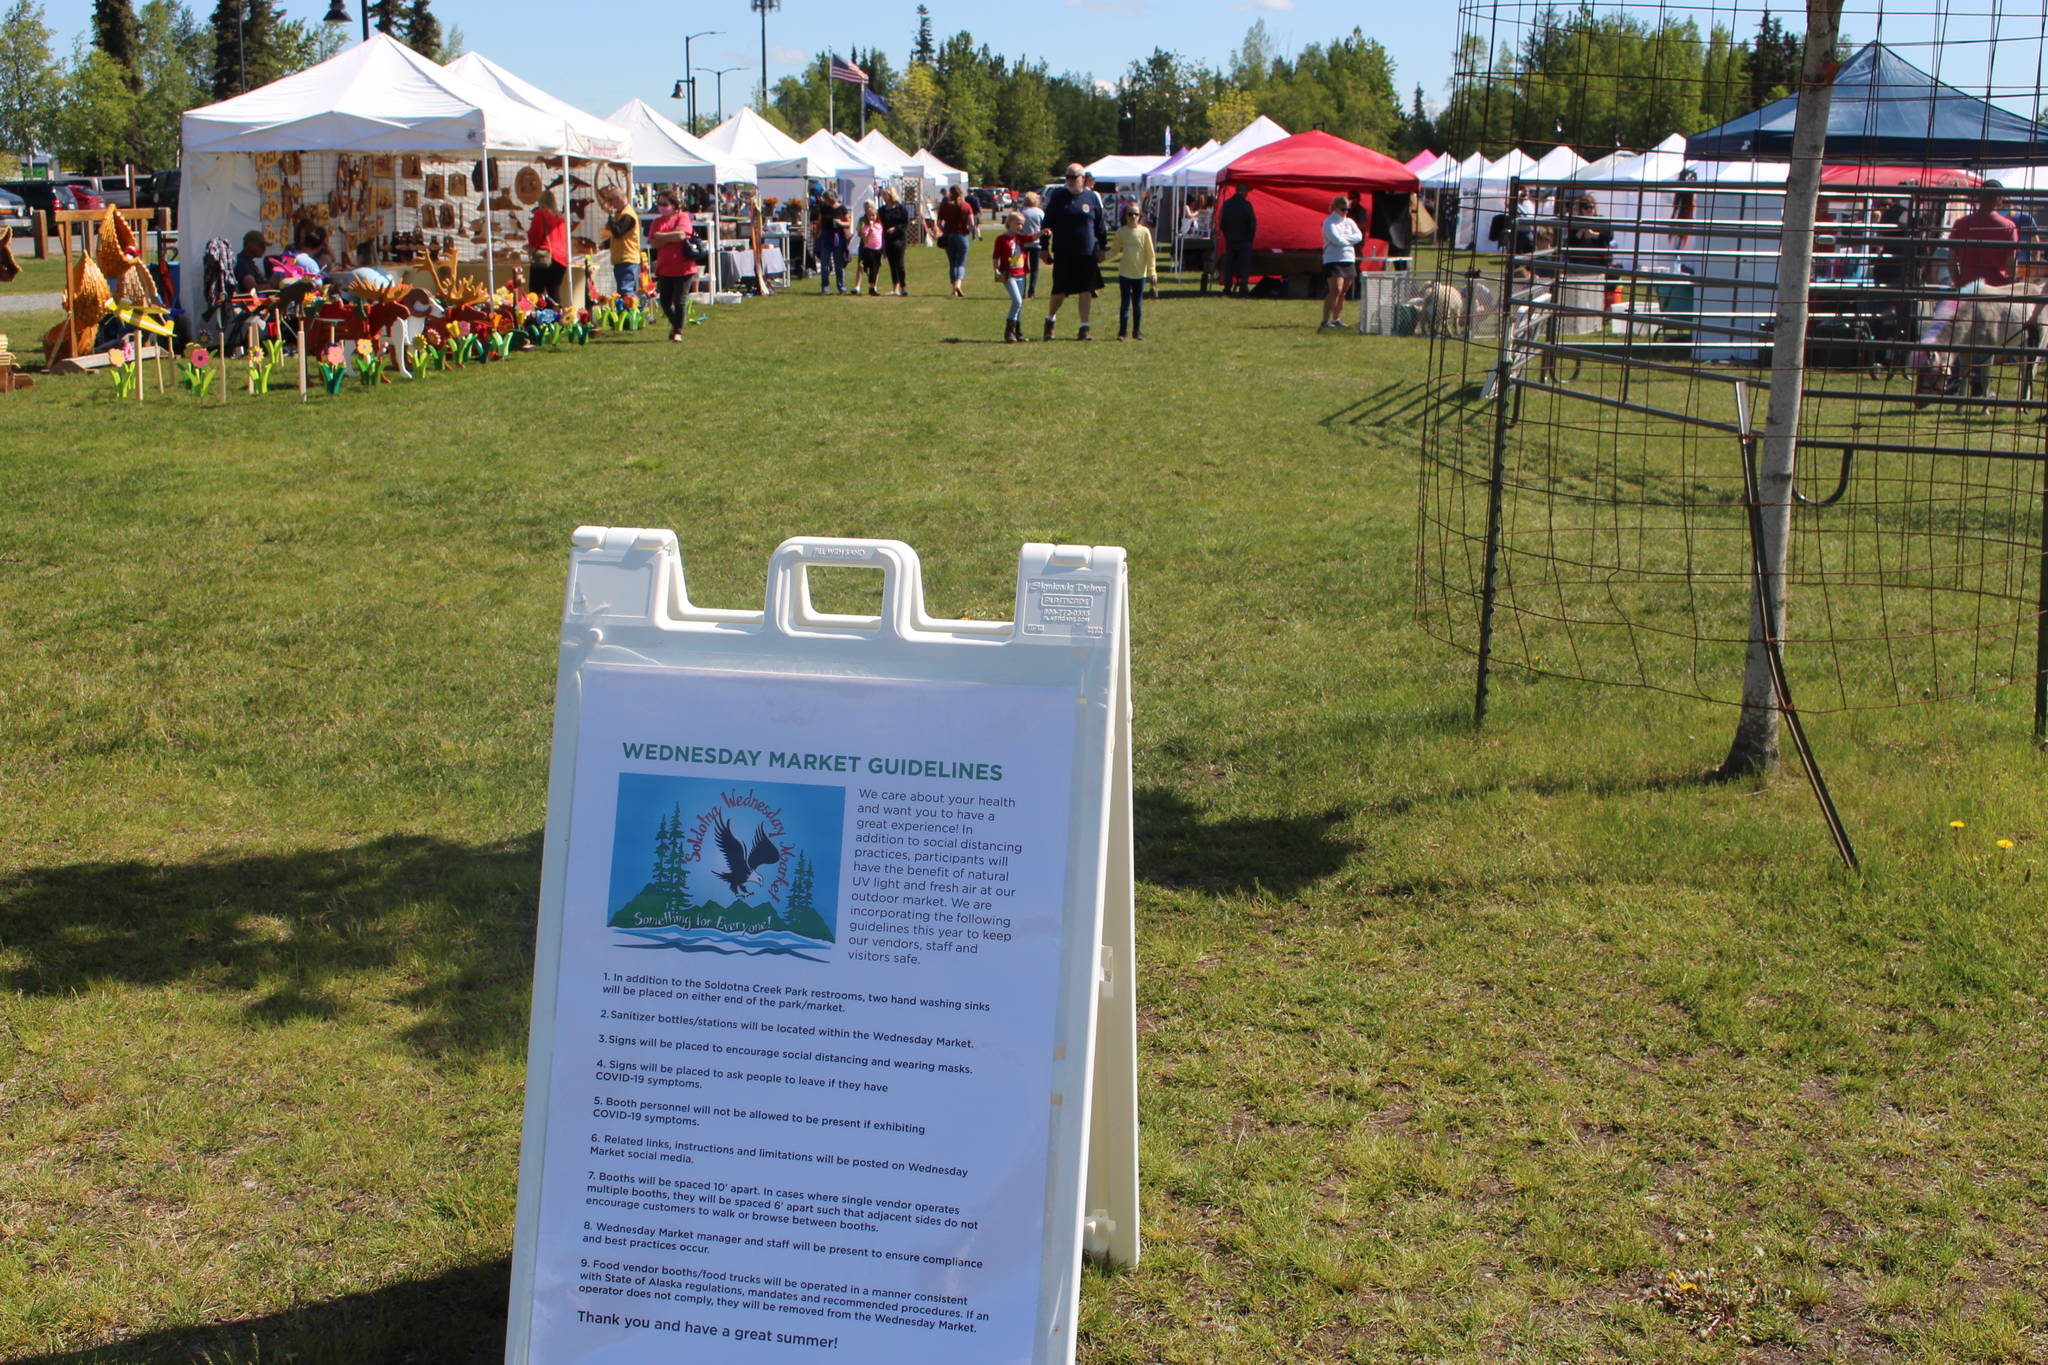 A sign detailing modified health protocols for the Wednesday Market is seen here at Soldotna Creek Park in Soldotna, Alaska on June 10, 2020. (Photo by Brian Mazurek/Peninsula Clarion)